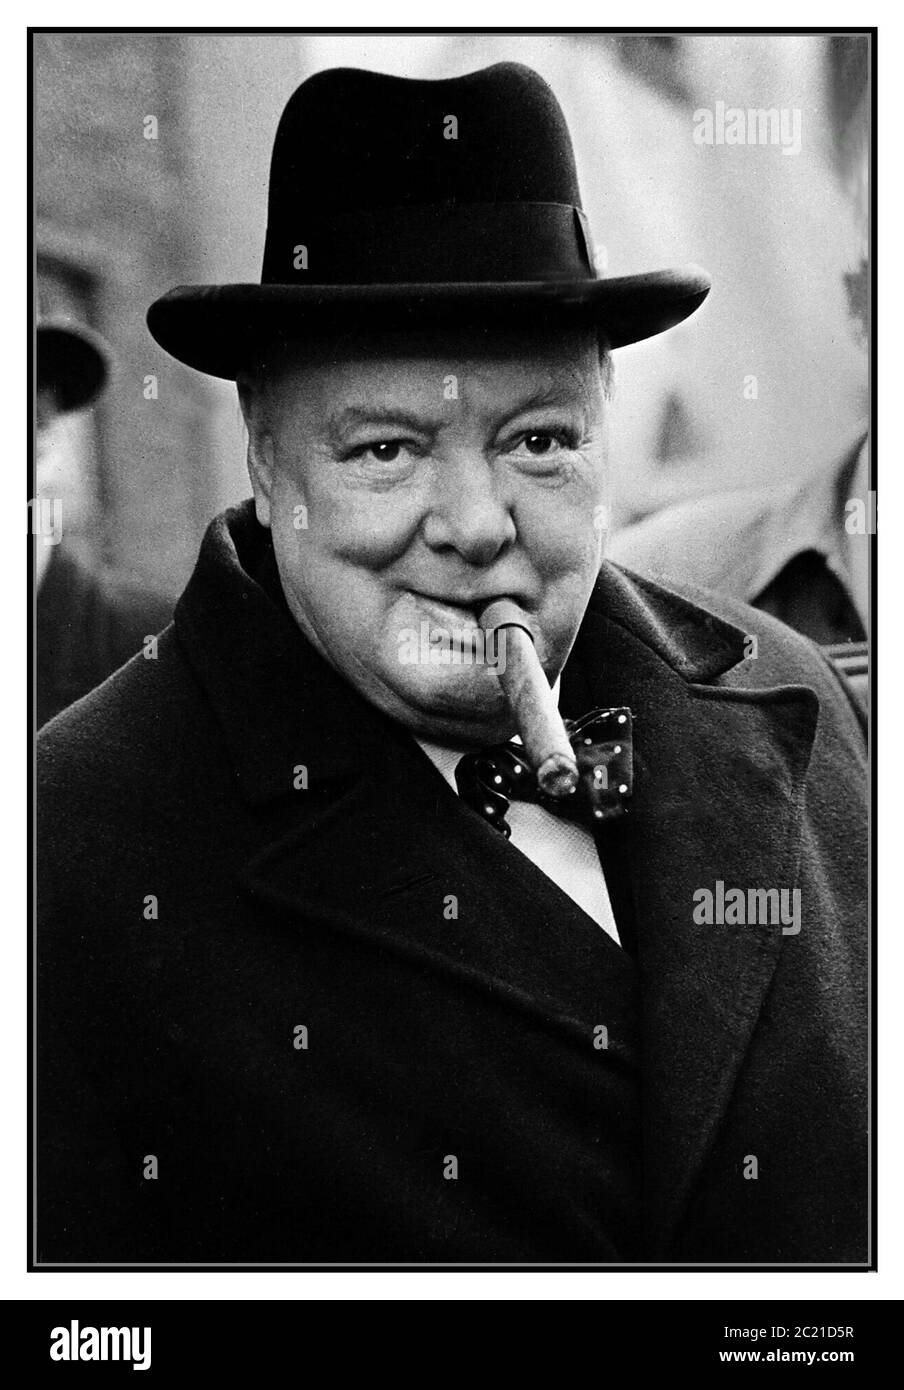 WINSTON CHURCHILL WITH CIGAR BOW TIE AND HOMBURG HAT  Great Britain's greatest and revered wartime leader, whose magnificent speeches galvanised a nation to successfully resist Nazi Germany aggression in World War II. This post war image 1947/1948 finds him smoking his favourite and signature cuban cigar. Churchill was knighted for his services to Great Britain, as Sir Winston Leonard Spencer Churchill. A great English statesman writer and keen artist painter (1874-1965). Stock Photo